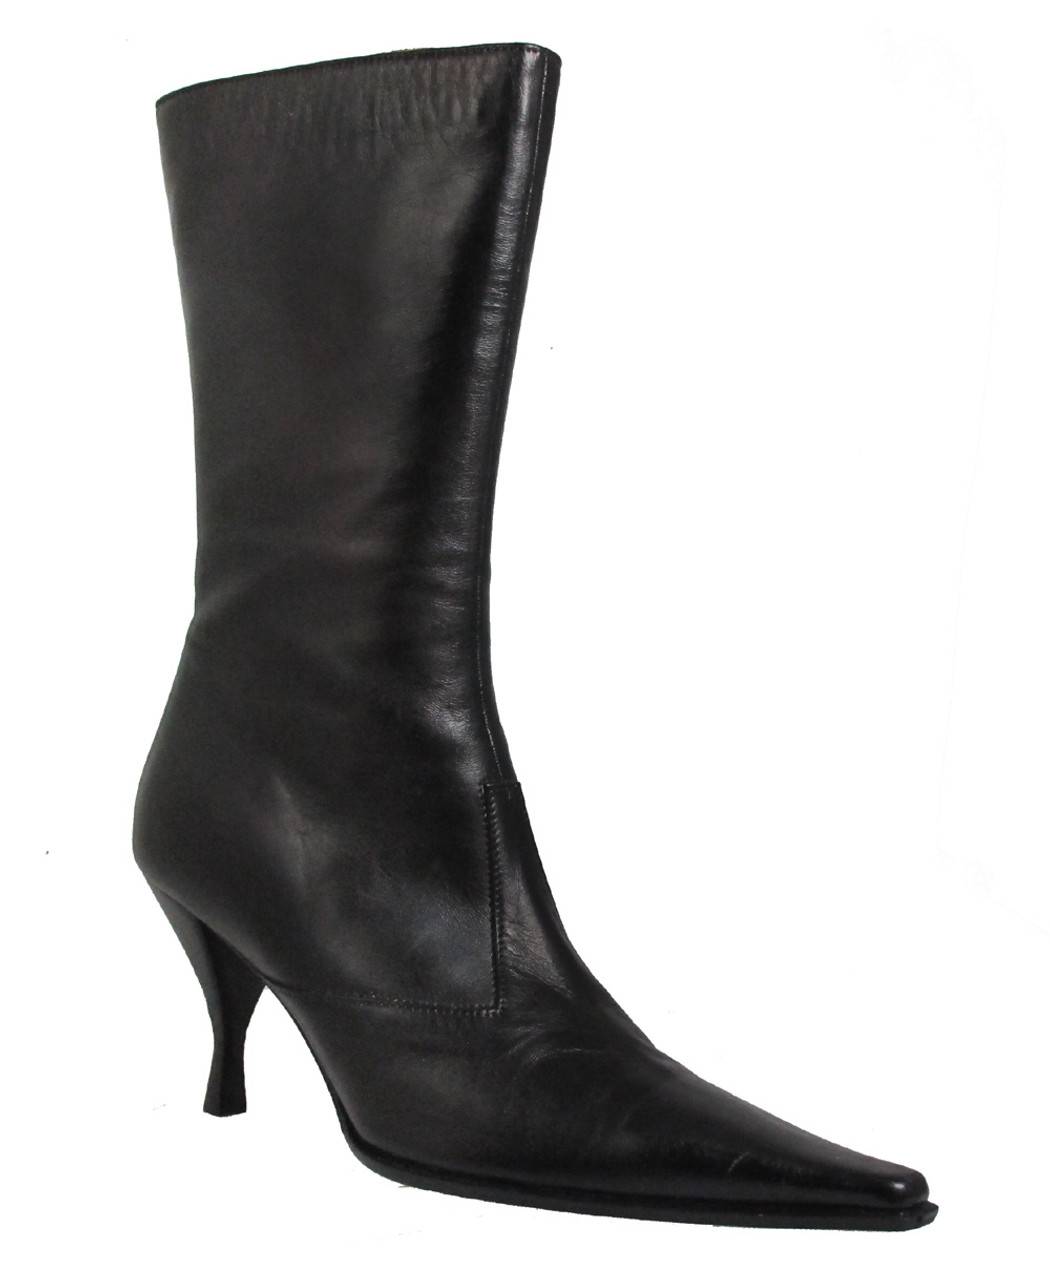 Ramirez 12888 Mid calf Mid heel pointy toe boots in black and brown